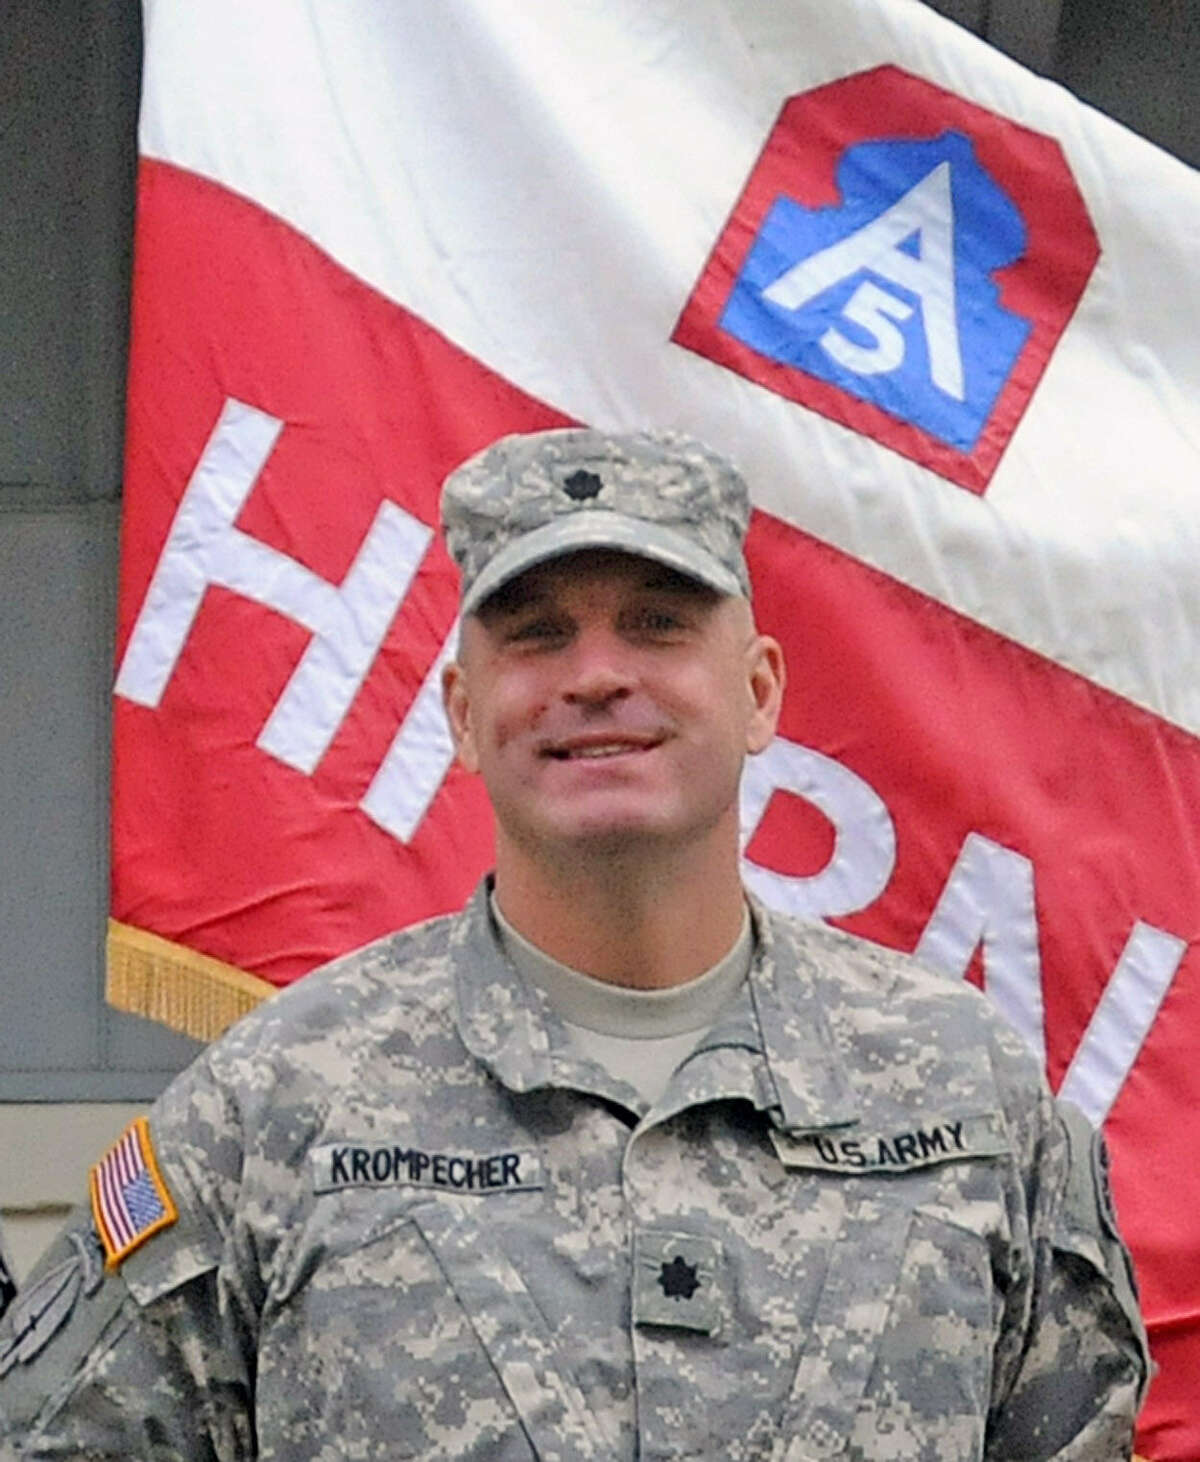 Lt. Col. Zoltan Krompecher is the commander of Headquarters and Headquarters Battalion, U.S. Army North at Fort Sam Houston. He is a contributing writer to the book “Operation Homecoming.”